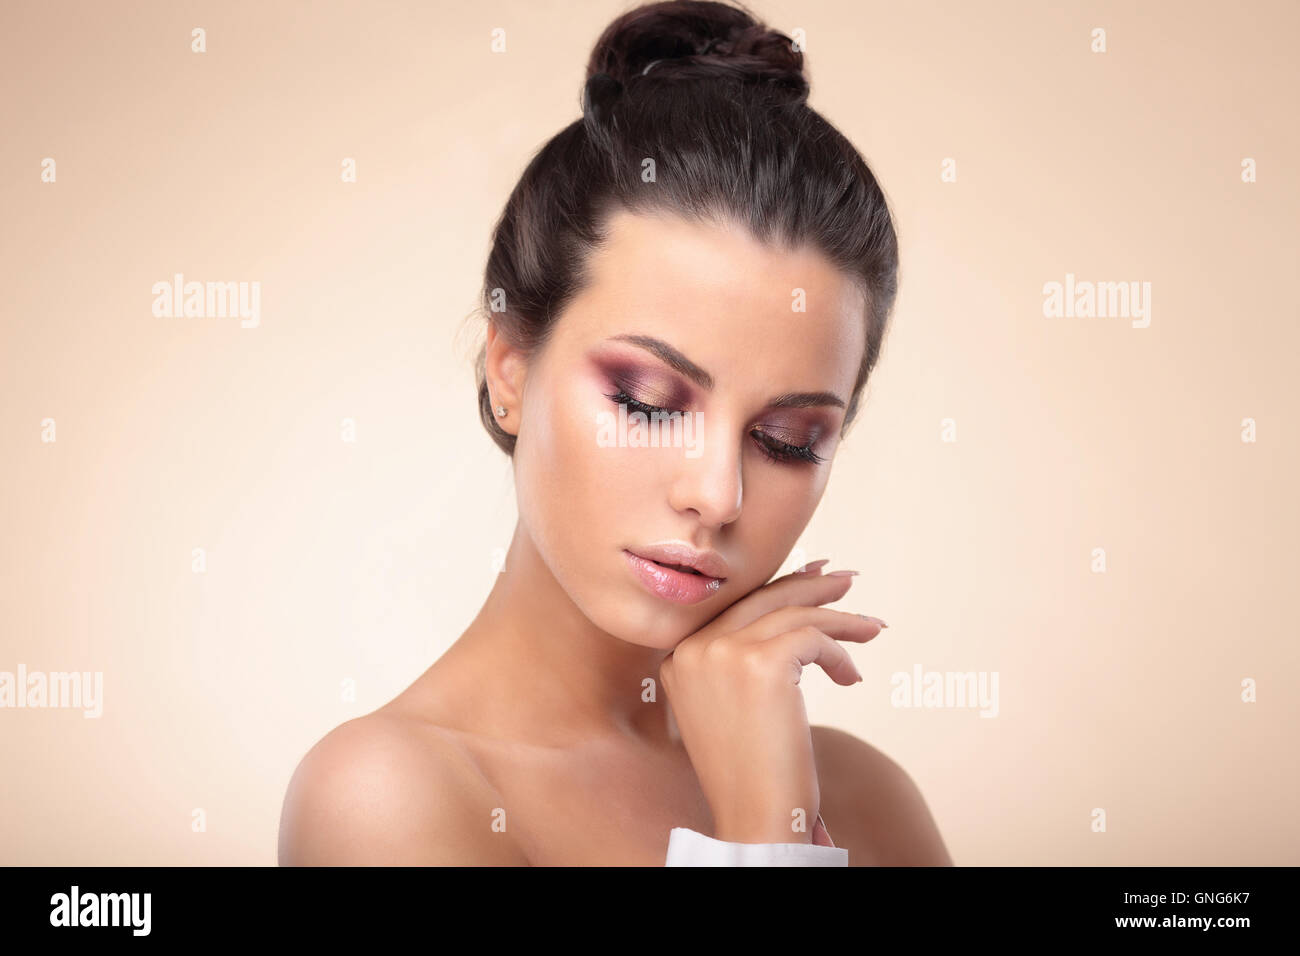 Portrait of beautiful woman touching her face, isolated on beige background. Stock Photo